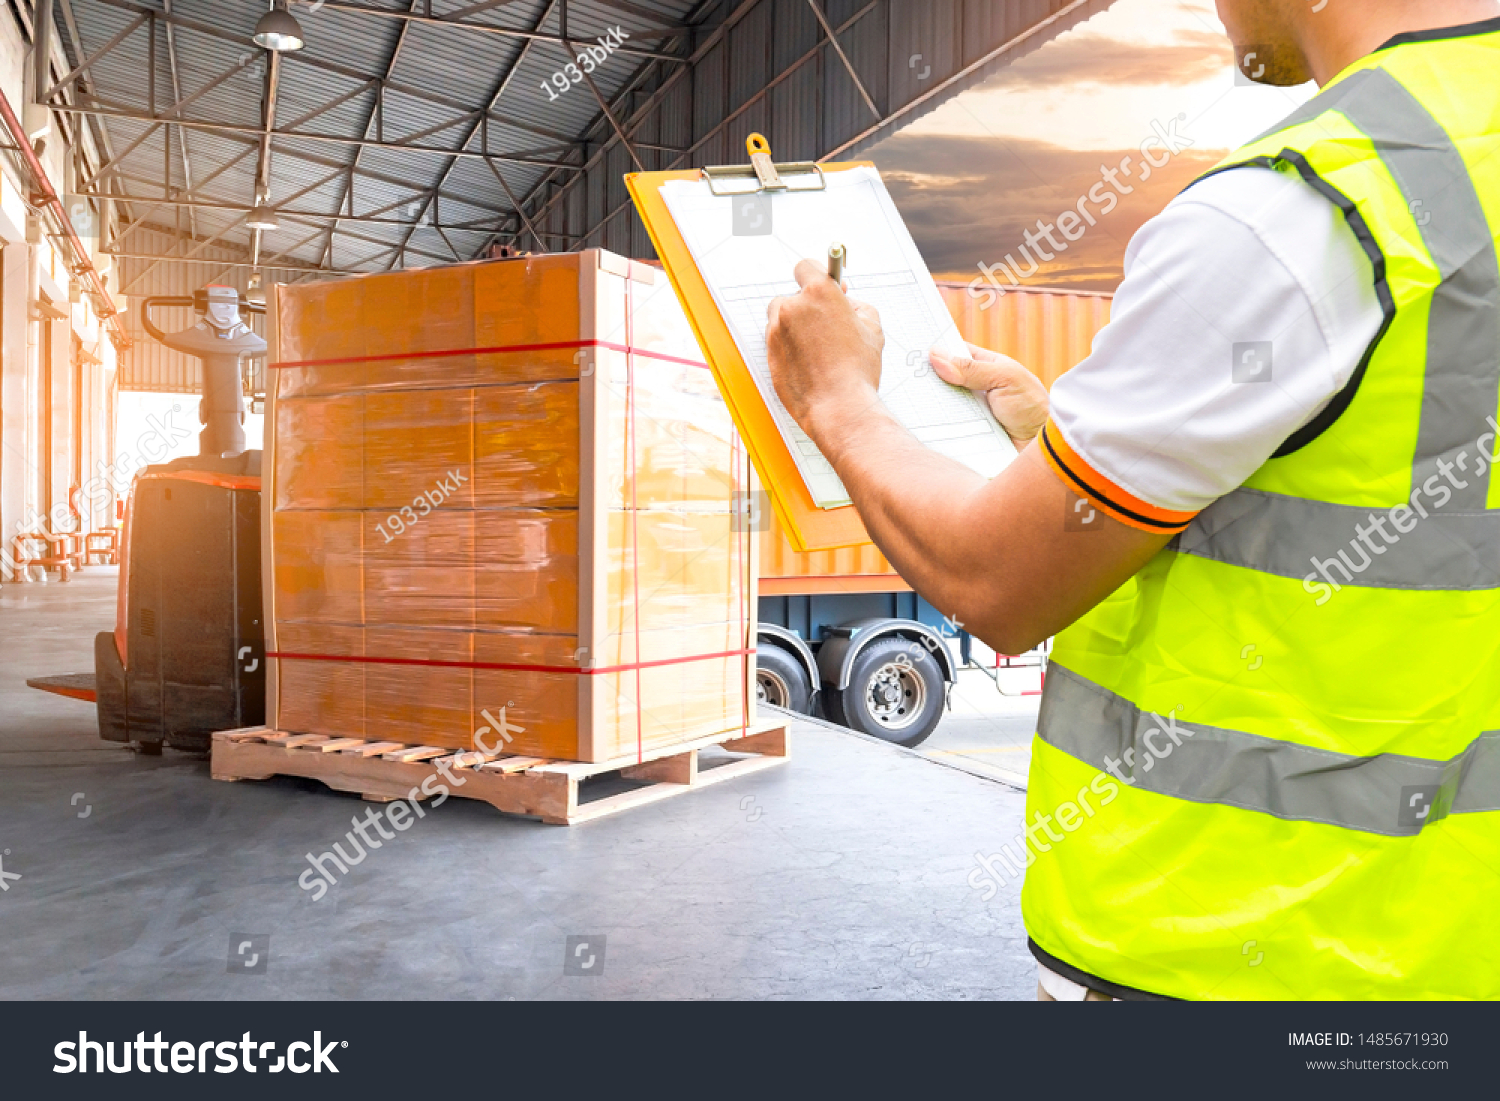 Workers Holding Clipboard is Checking Stock of Package Boxes. Storage Warehouse. Inventory Management Supplies. Supply Chain. Shipment Goods Shipping Warehouse Logistics.	 #1485671930